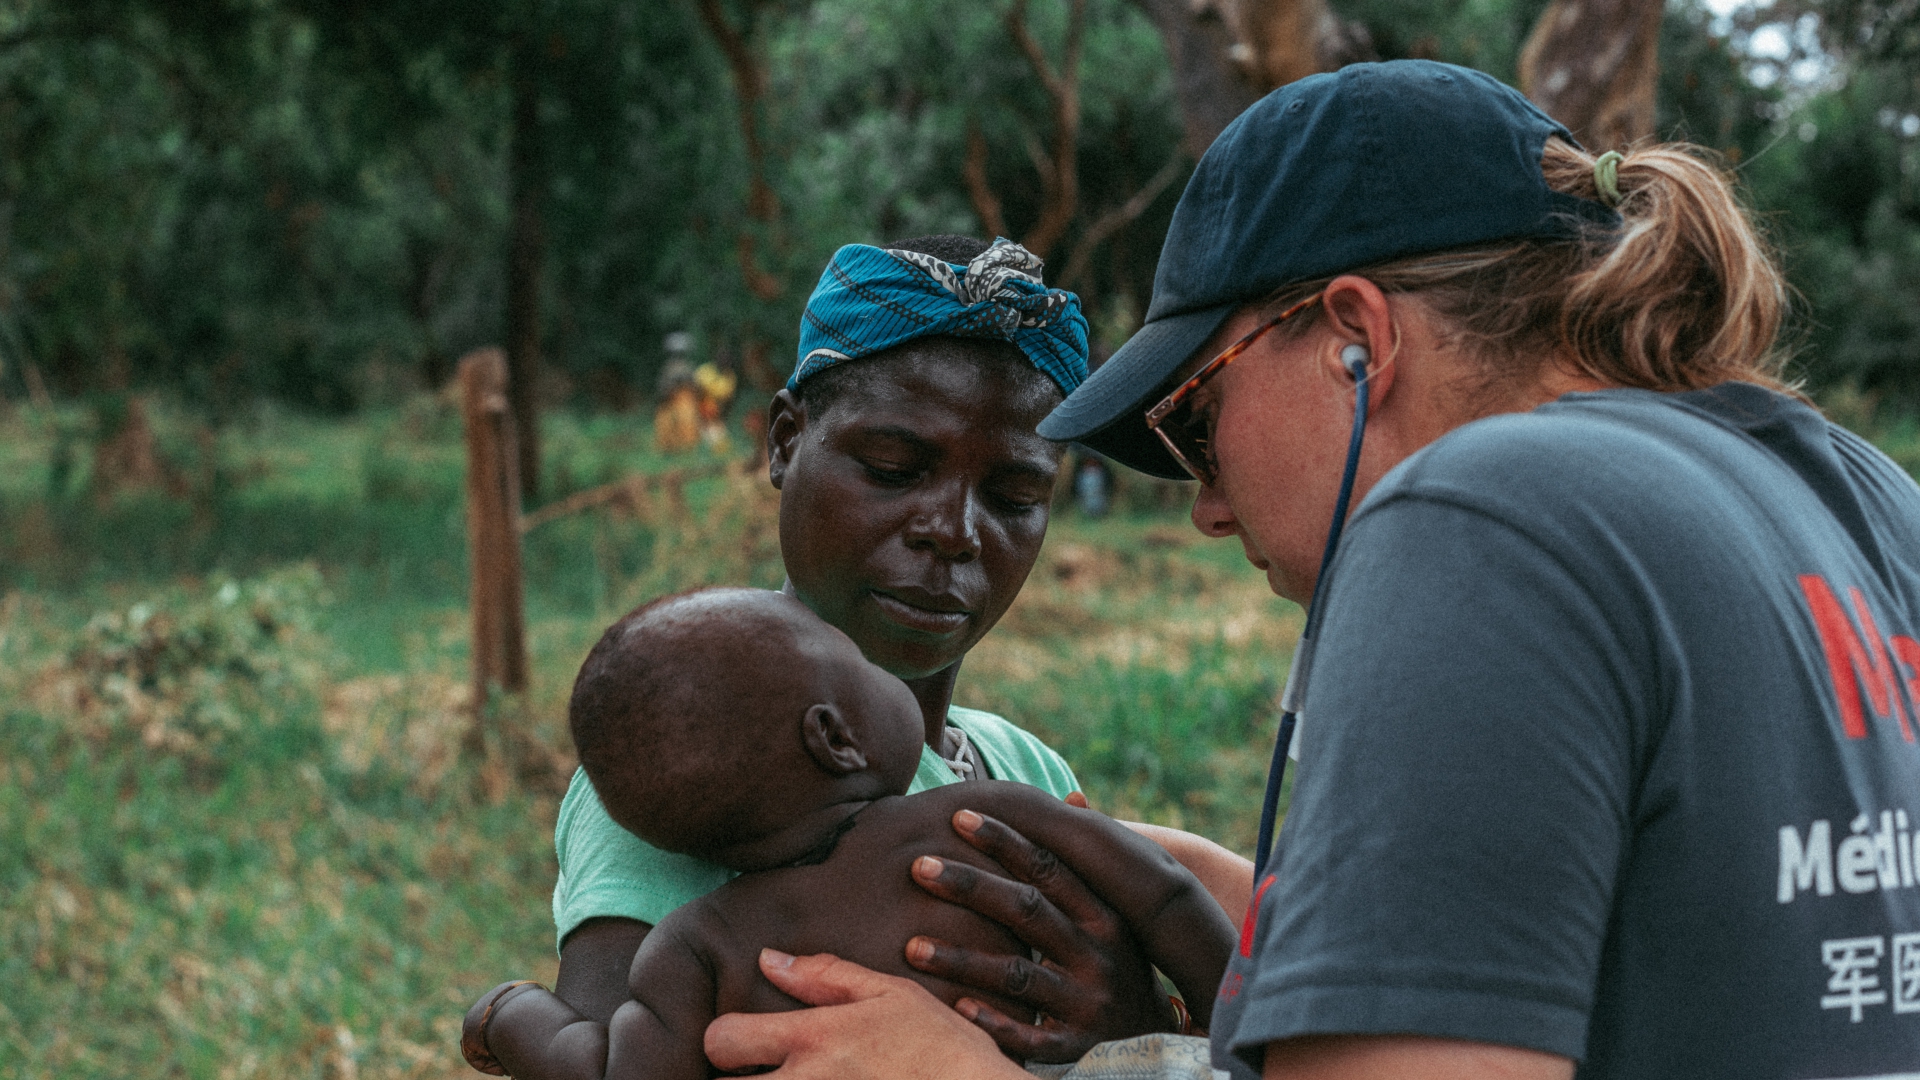 In March 2019, Cyclone Idai struck the densely-populated southeast African country of Mozambique, claiming more than 1,000 lives, destroying infrastructure and displacing hundreds of thousands. Within hours, Atrium Health medical groups teamed up with Team Rubicon to provide emergency medical care.